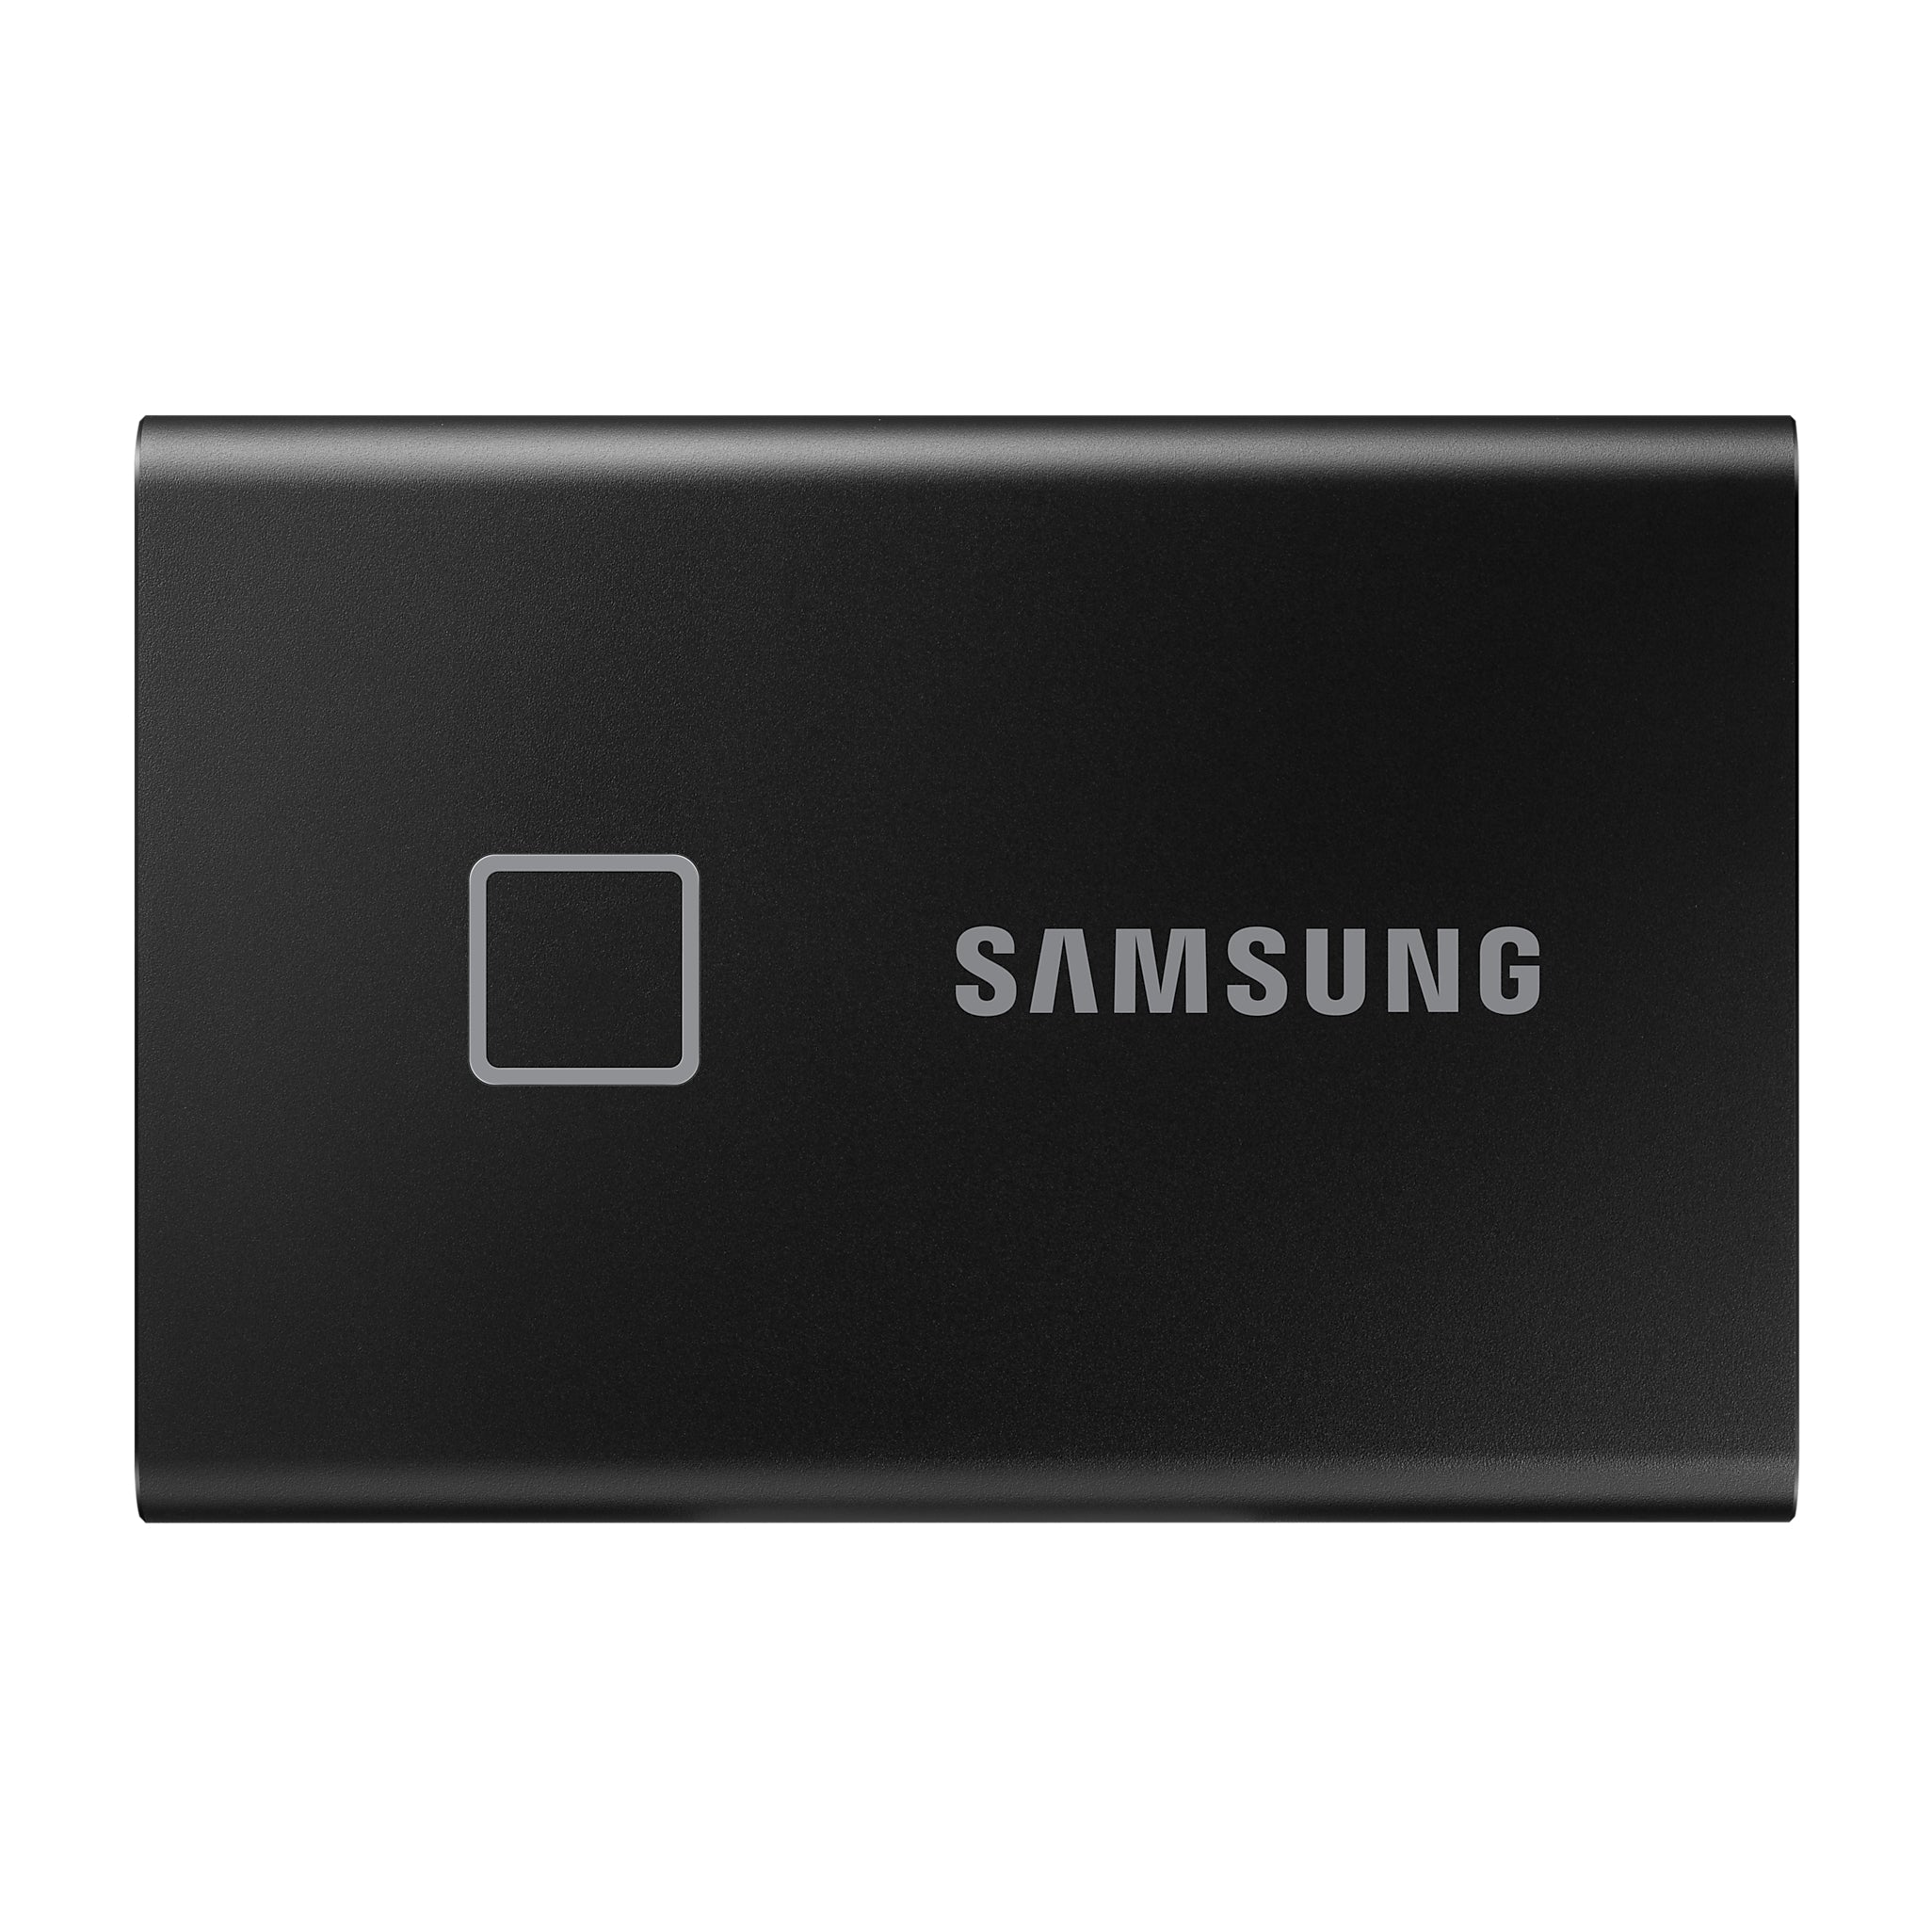 SAMSUNG T7 Touch Portable SSD 2TB